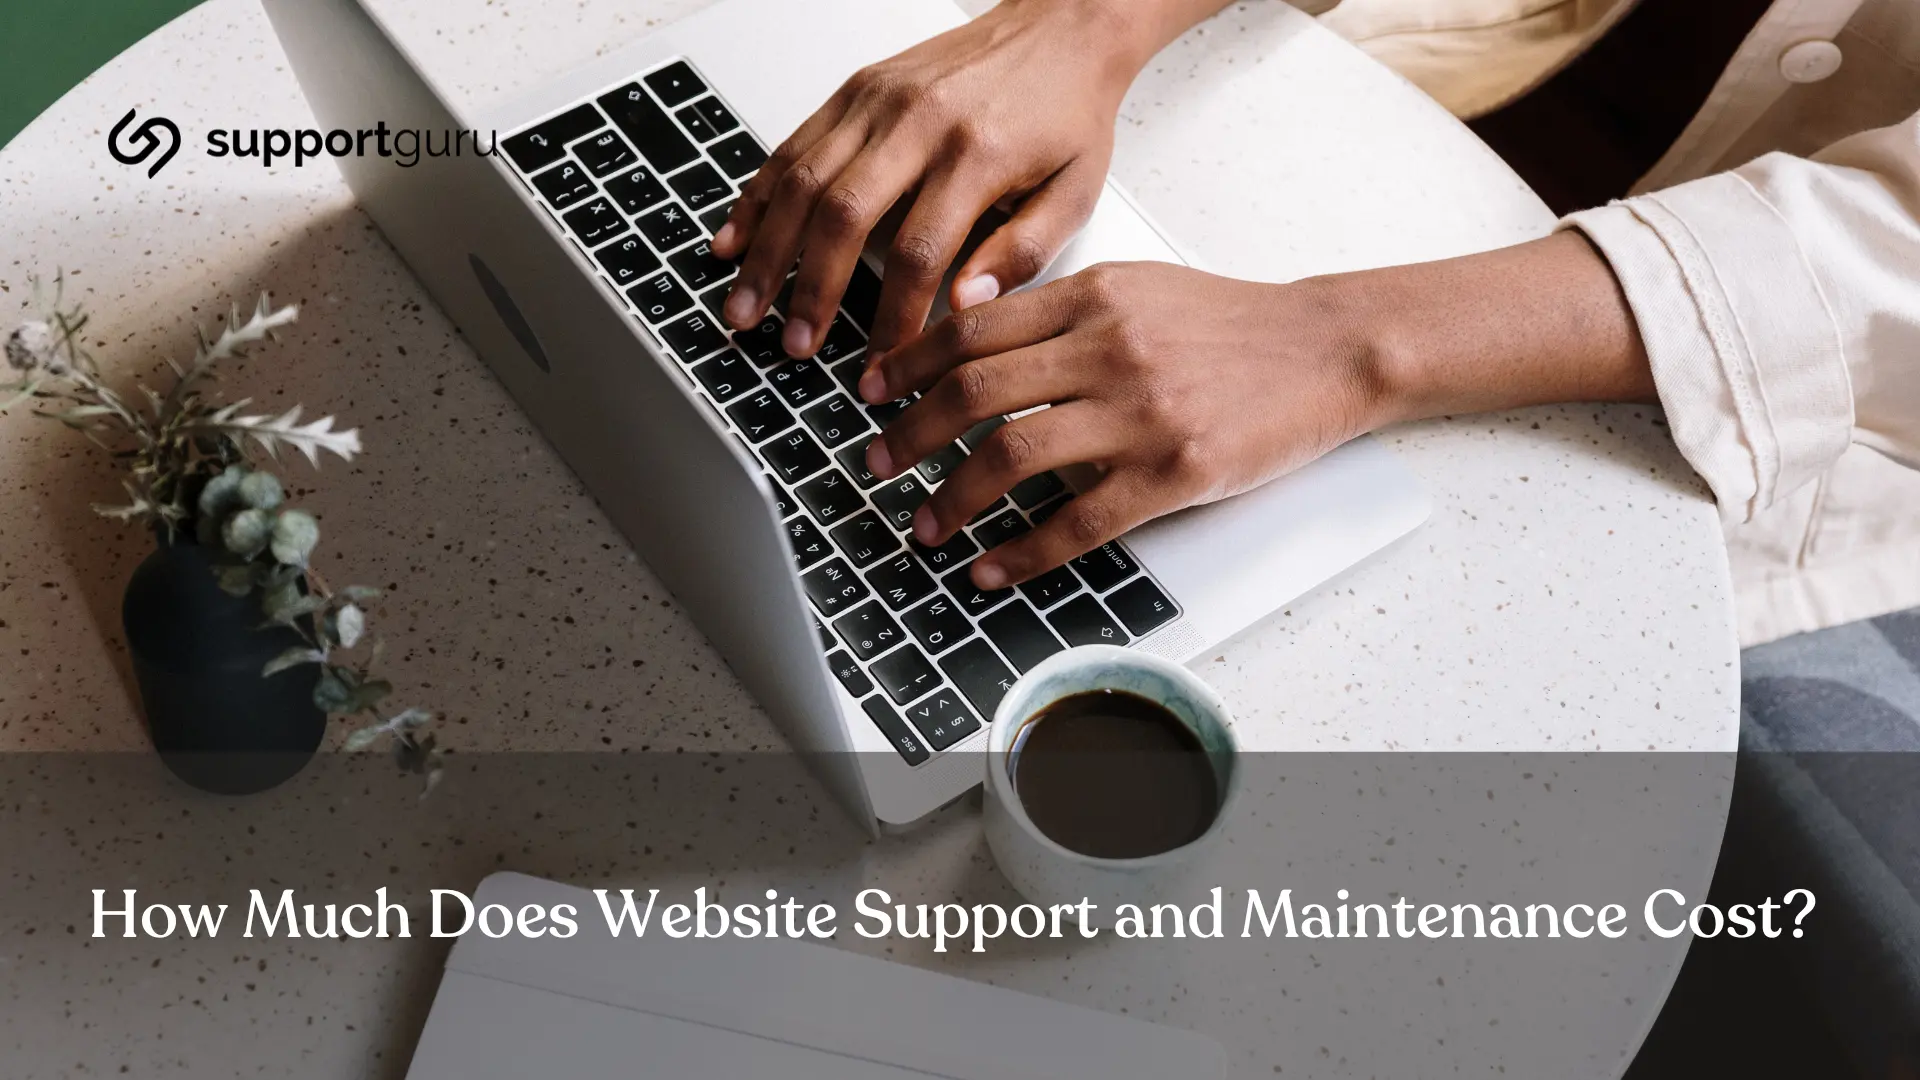 Website support and maintenance cost